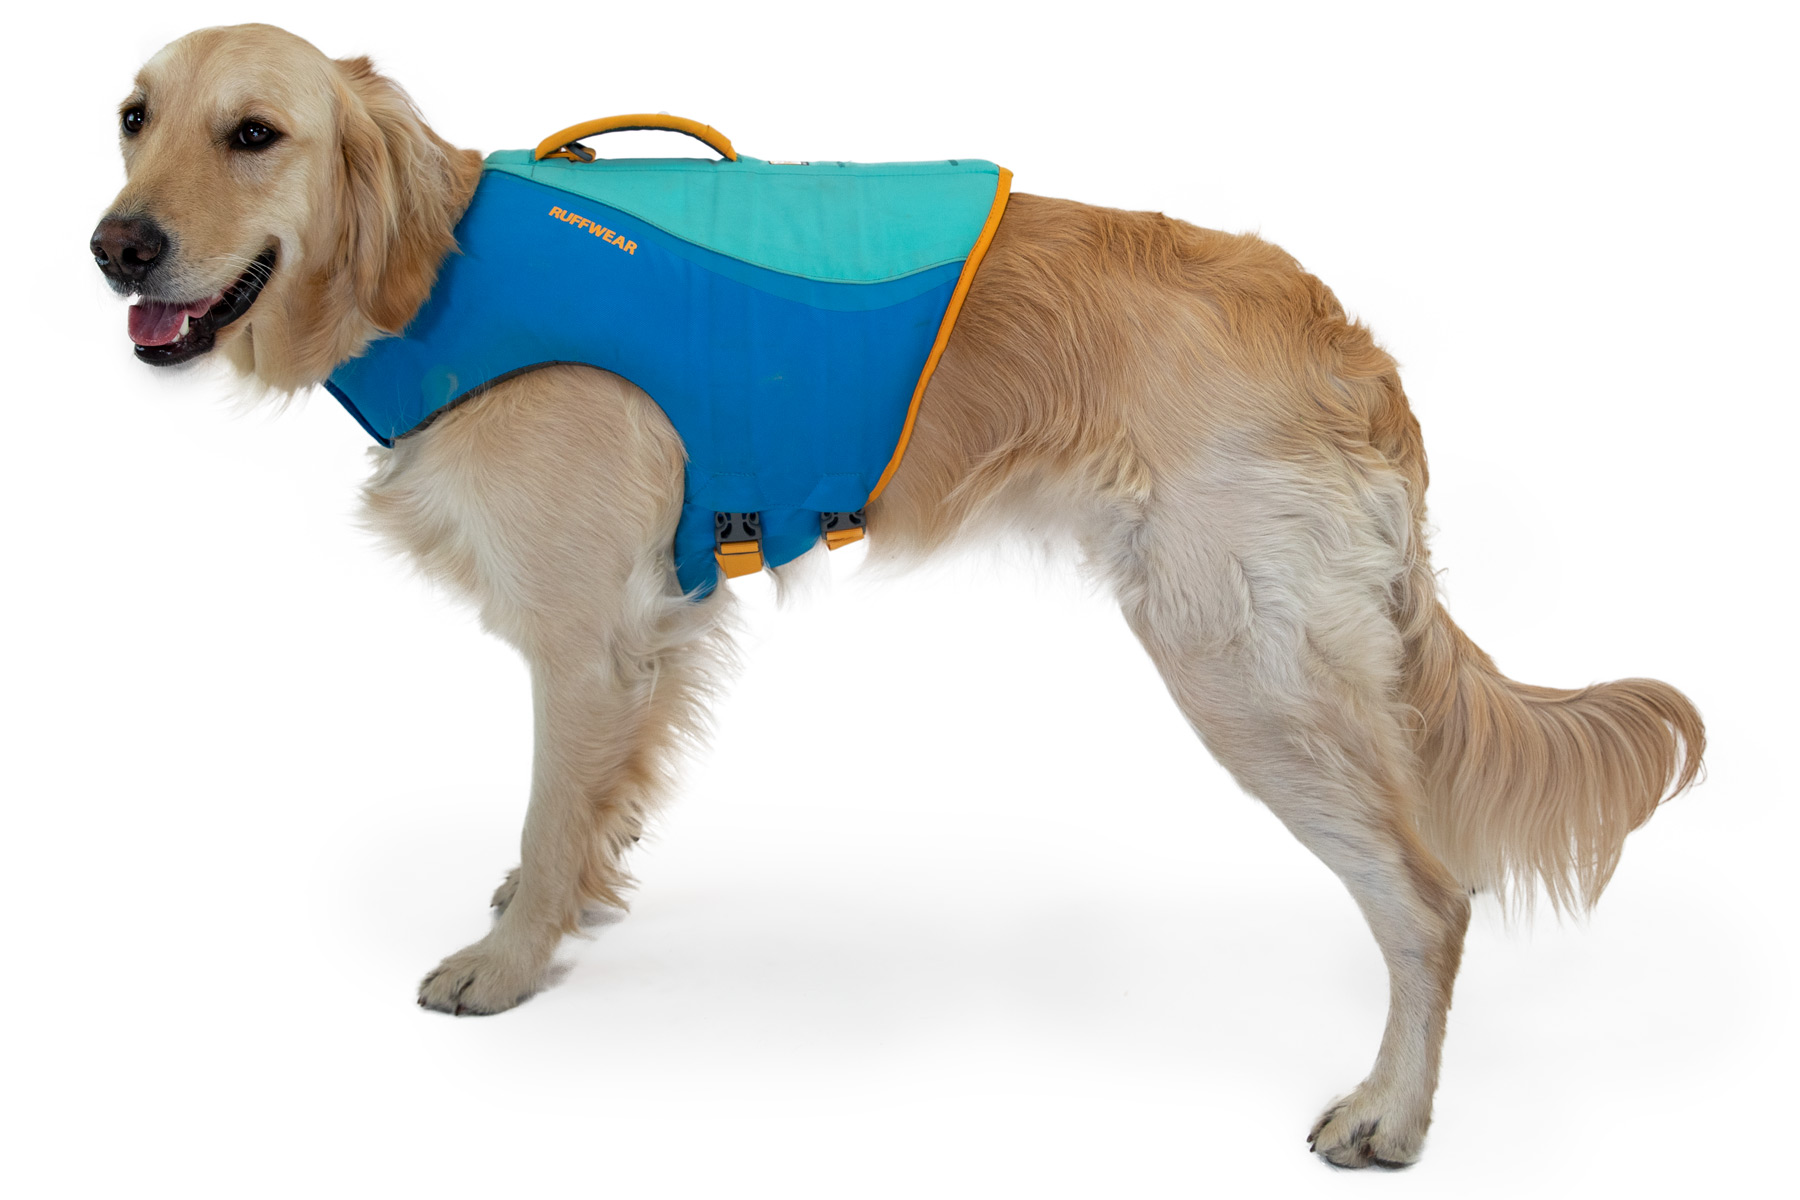 Best life jacket for Tripawd dogs